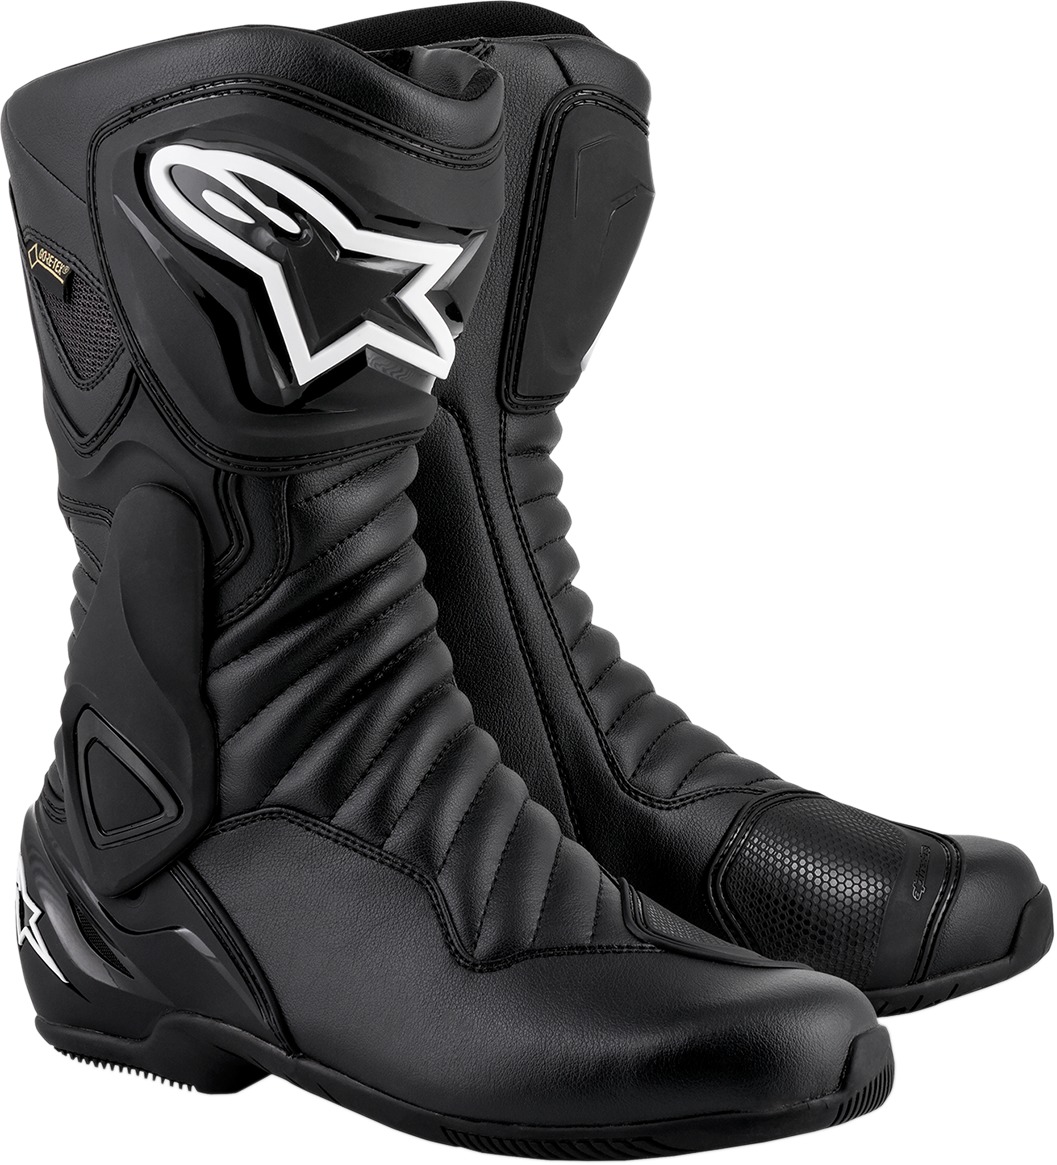 SMX-6 GTX Street Riding Boots Black US 10.5 - Click Image to Close